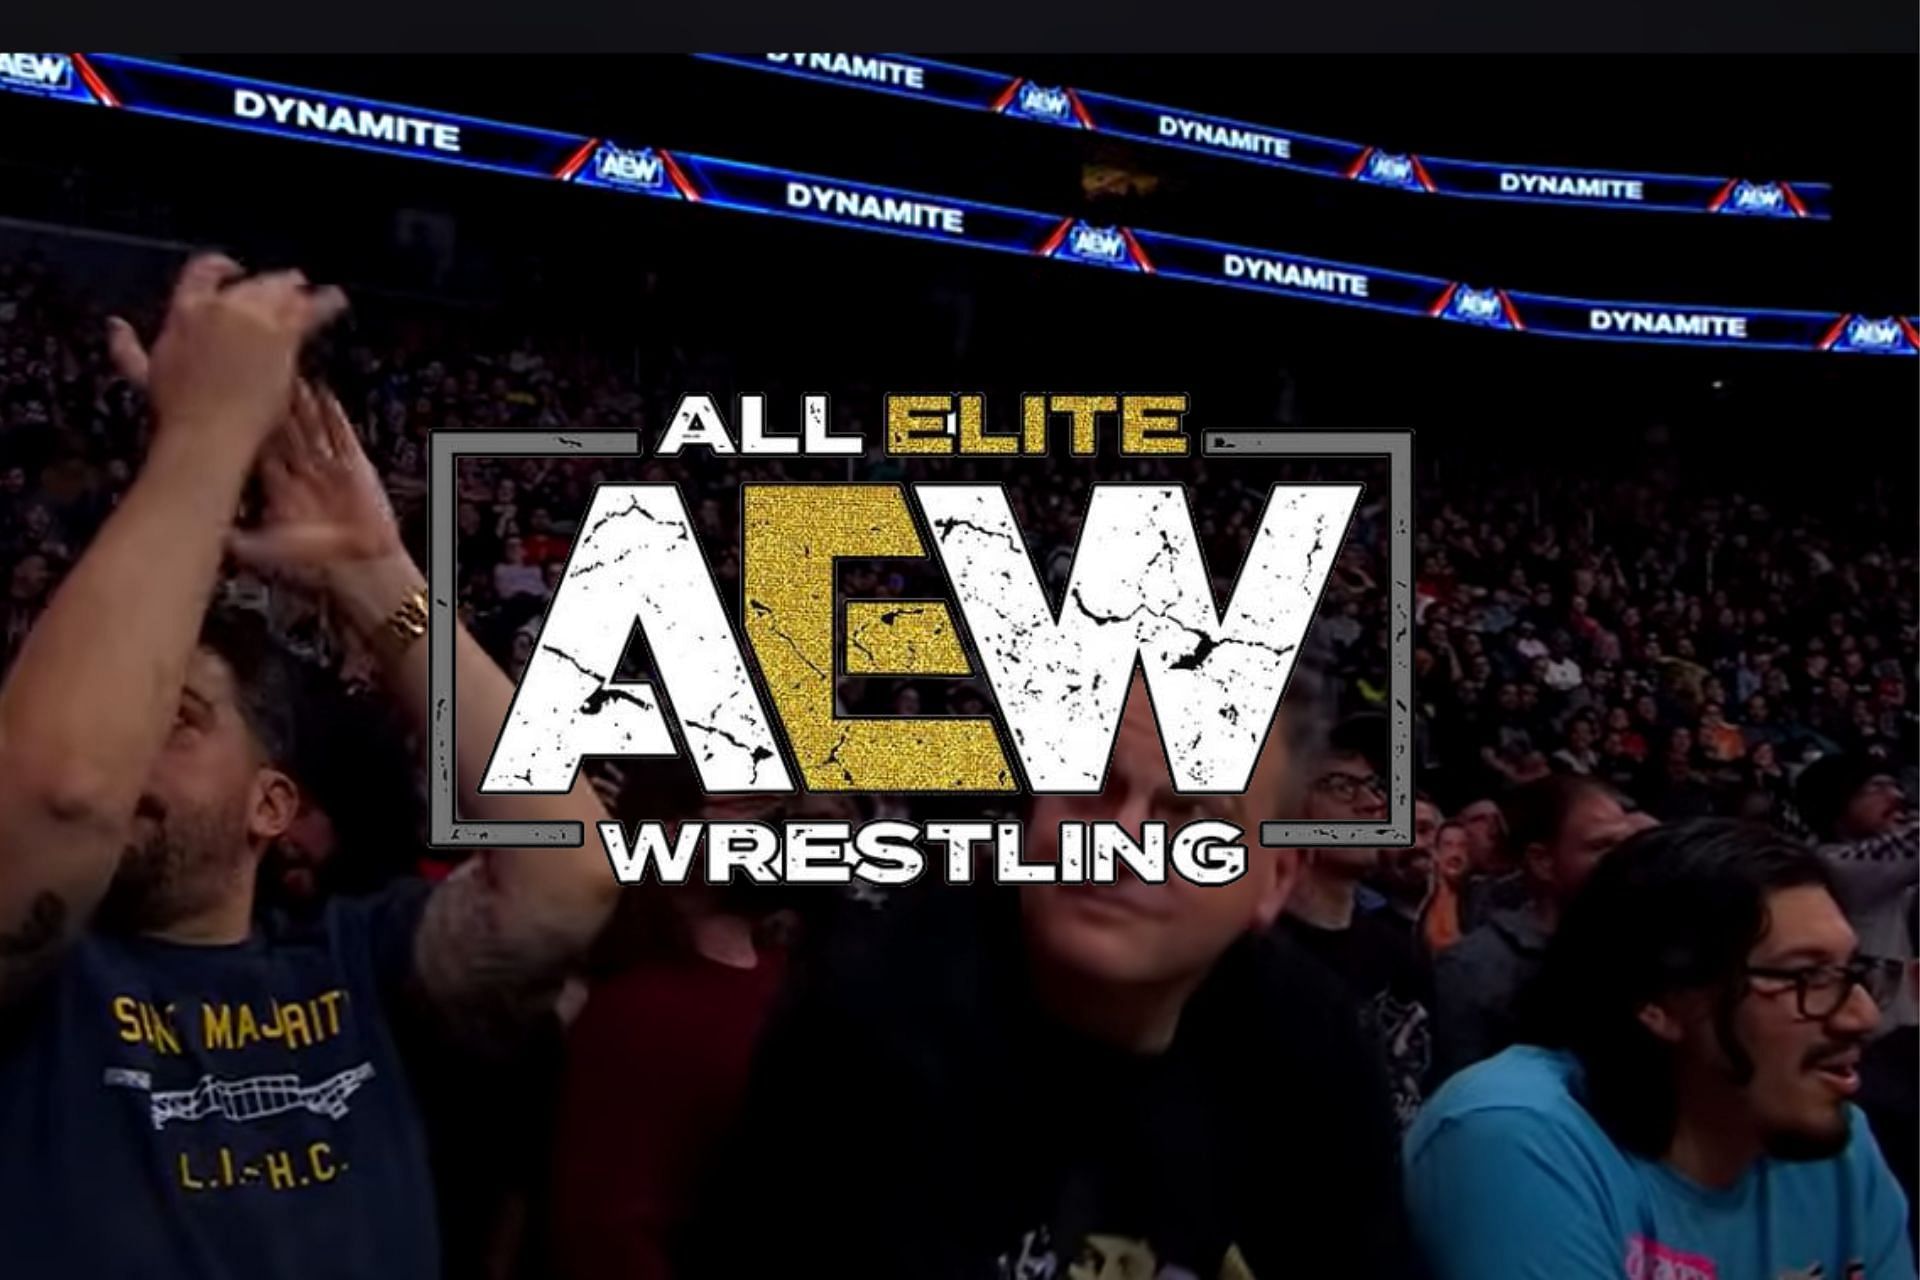 A female AEW wrestler might have a bigger role in storylines now [Image Credit: AEW YouTube]